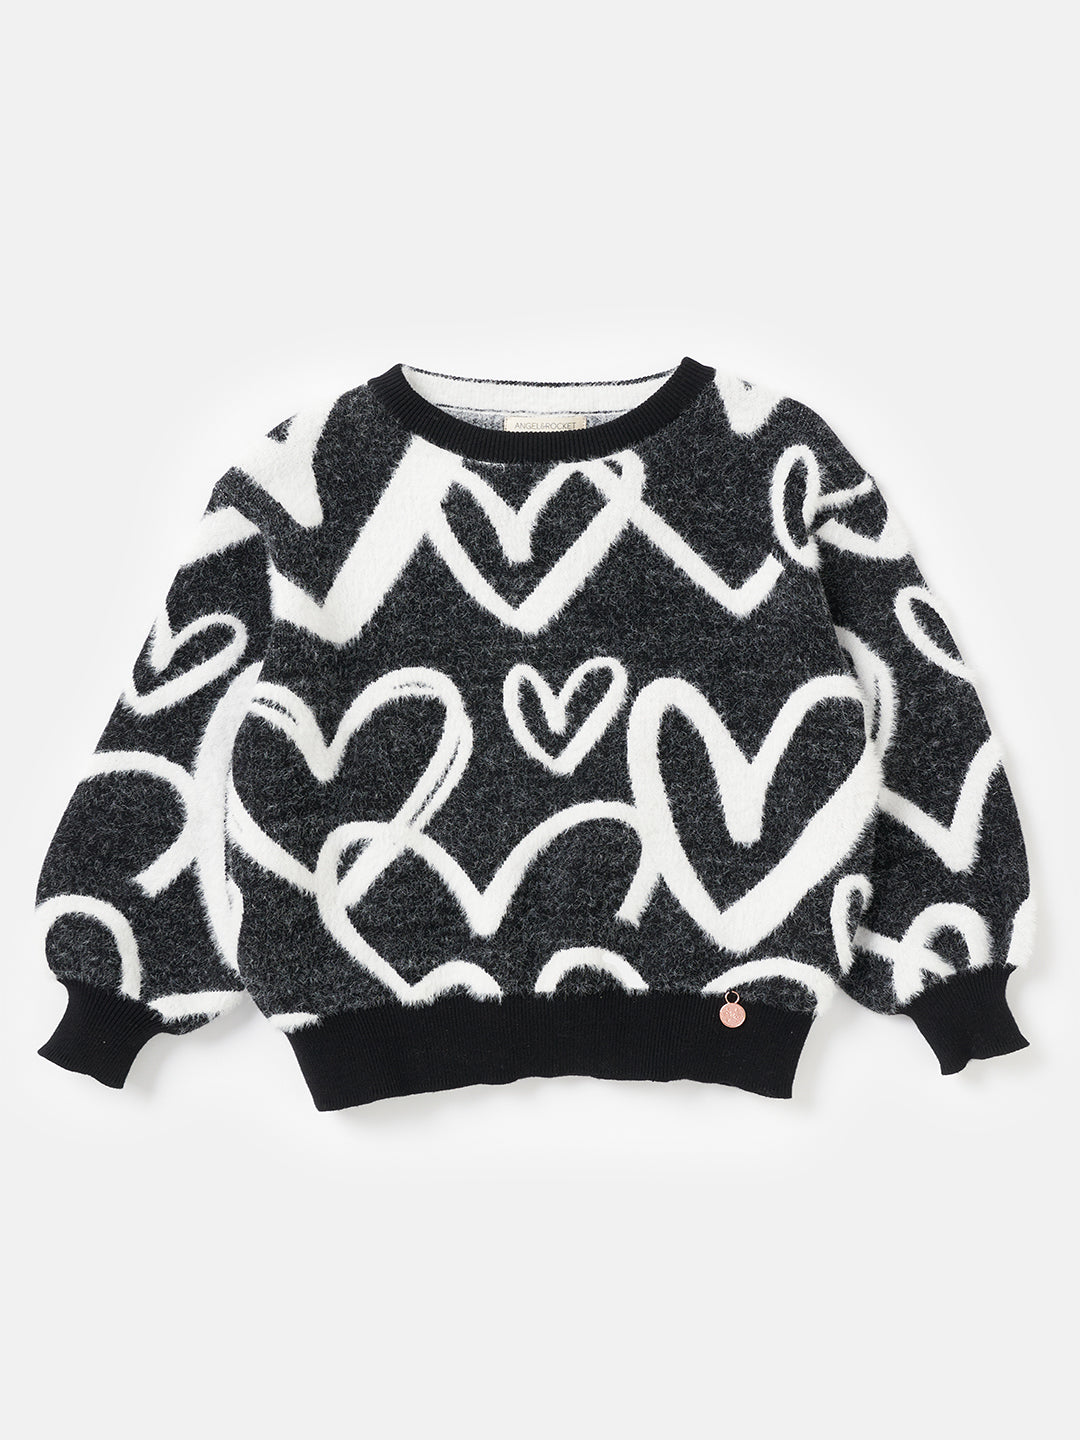 Girls Black and White Heart Printed Cuff Sleeves Sweater